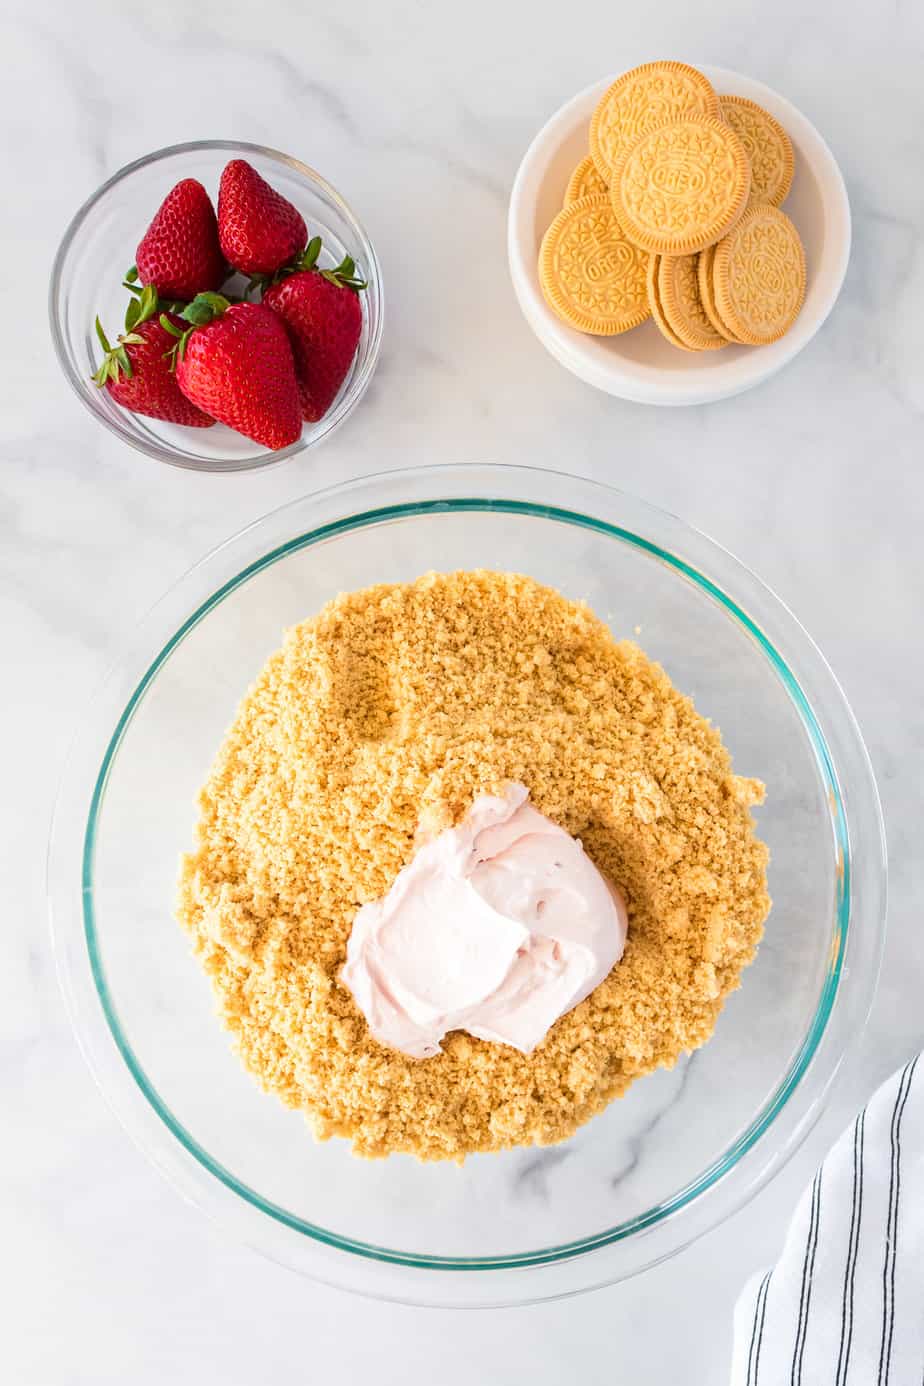 Mixing cream cheese into cookie crumbs in a bowl from overhead on the counter with strawberries and more cookies nearby.